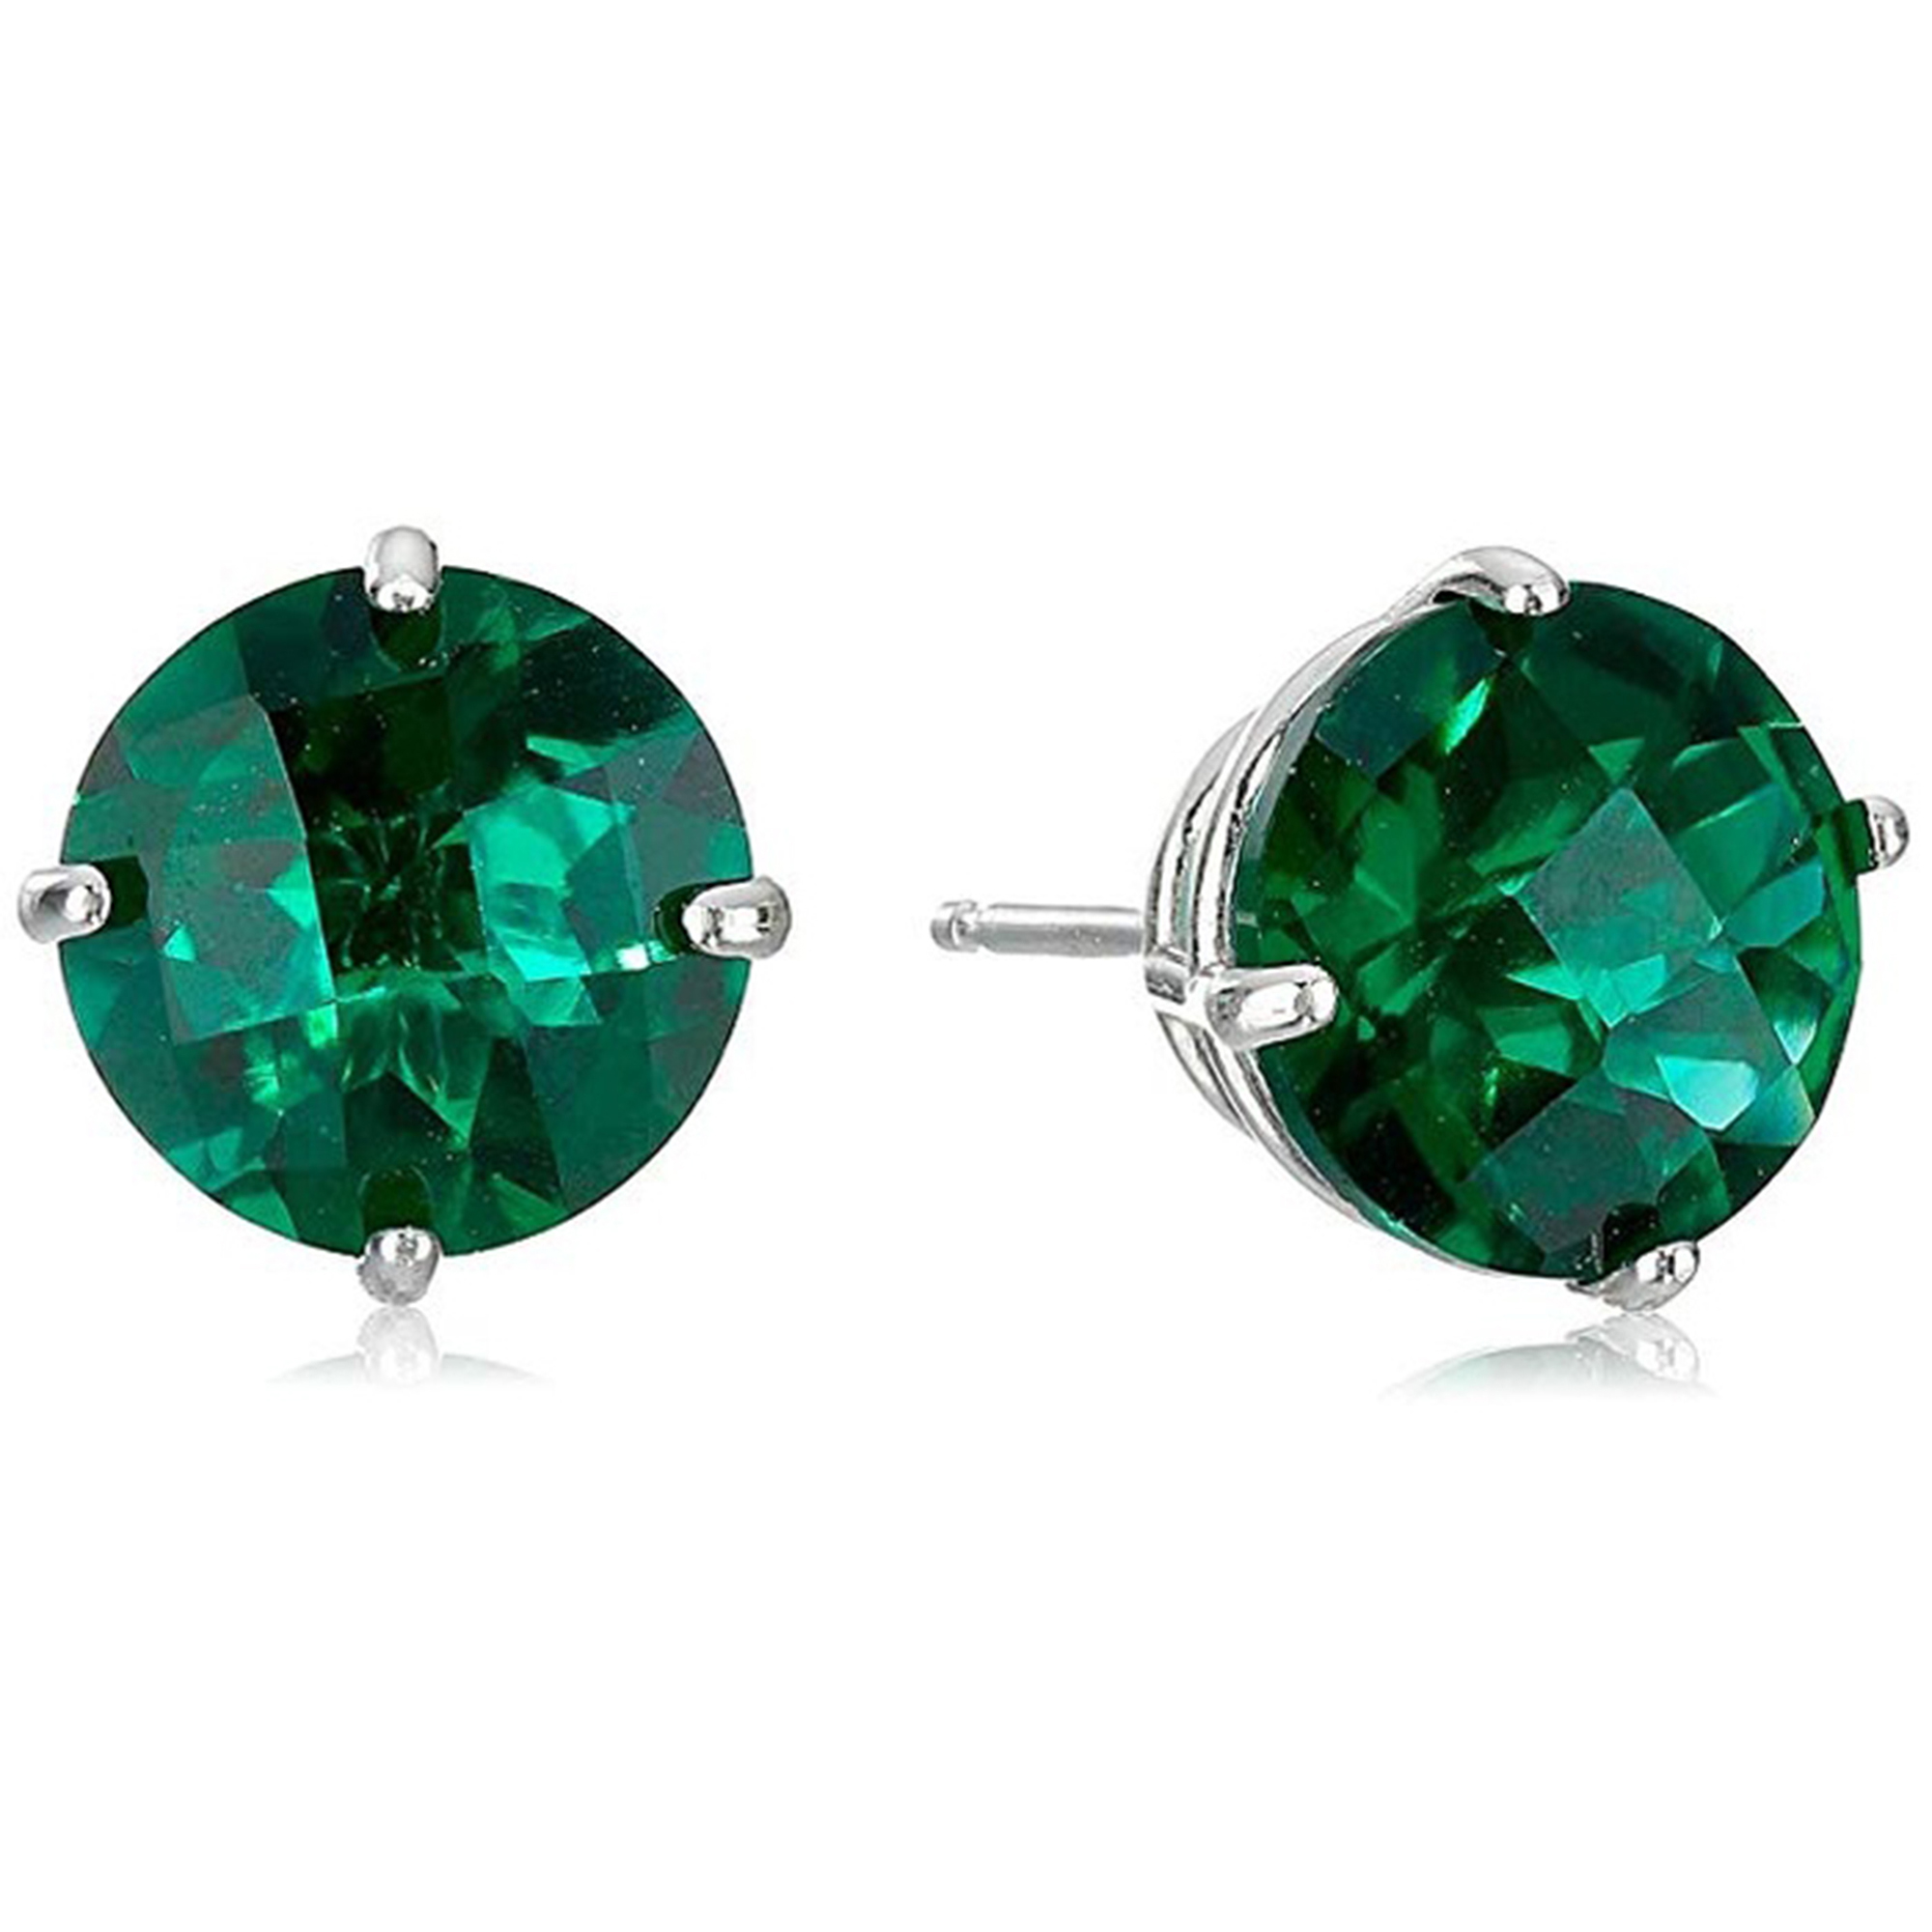 Bonjour Jewelers 14k White Gold Over Sterling Silver 1 Ct Round Emerald Stud Earrings Pack Of 2.